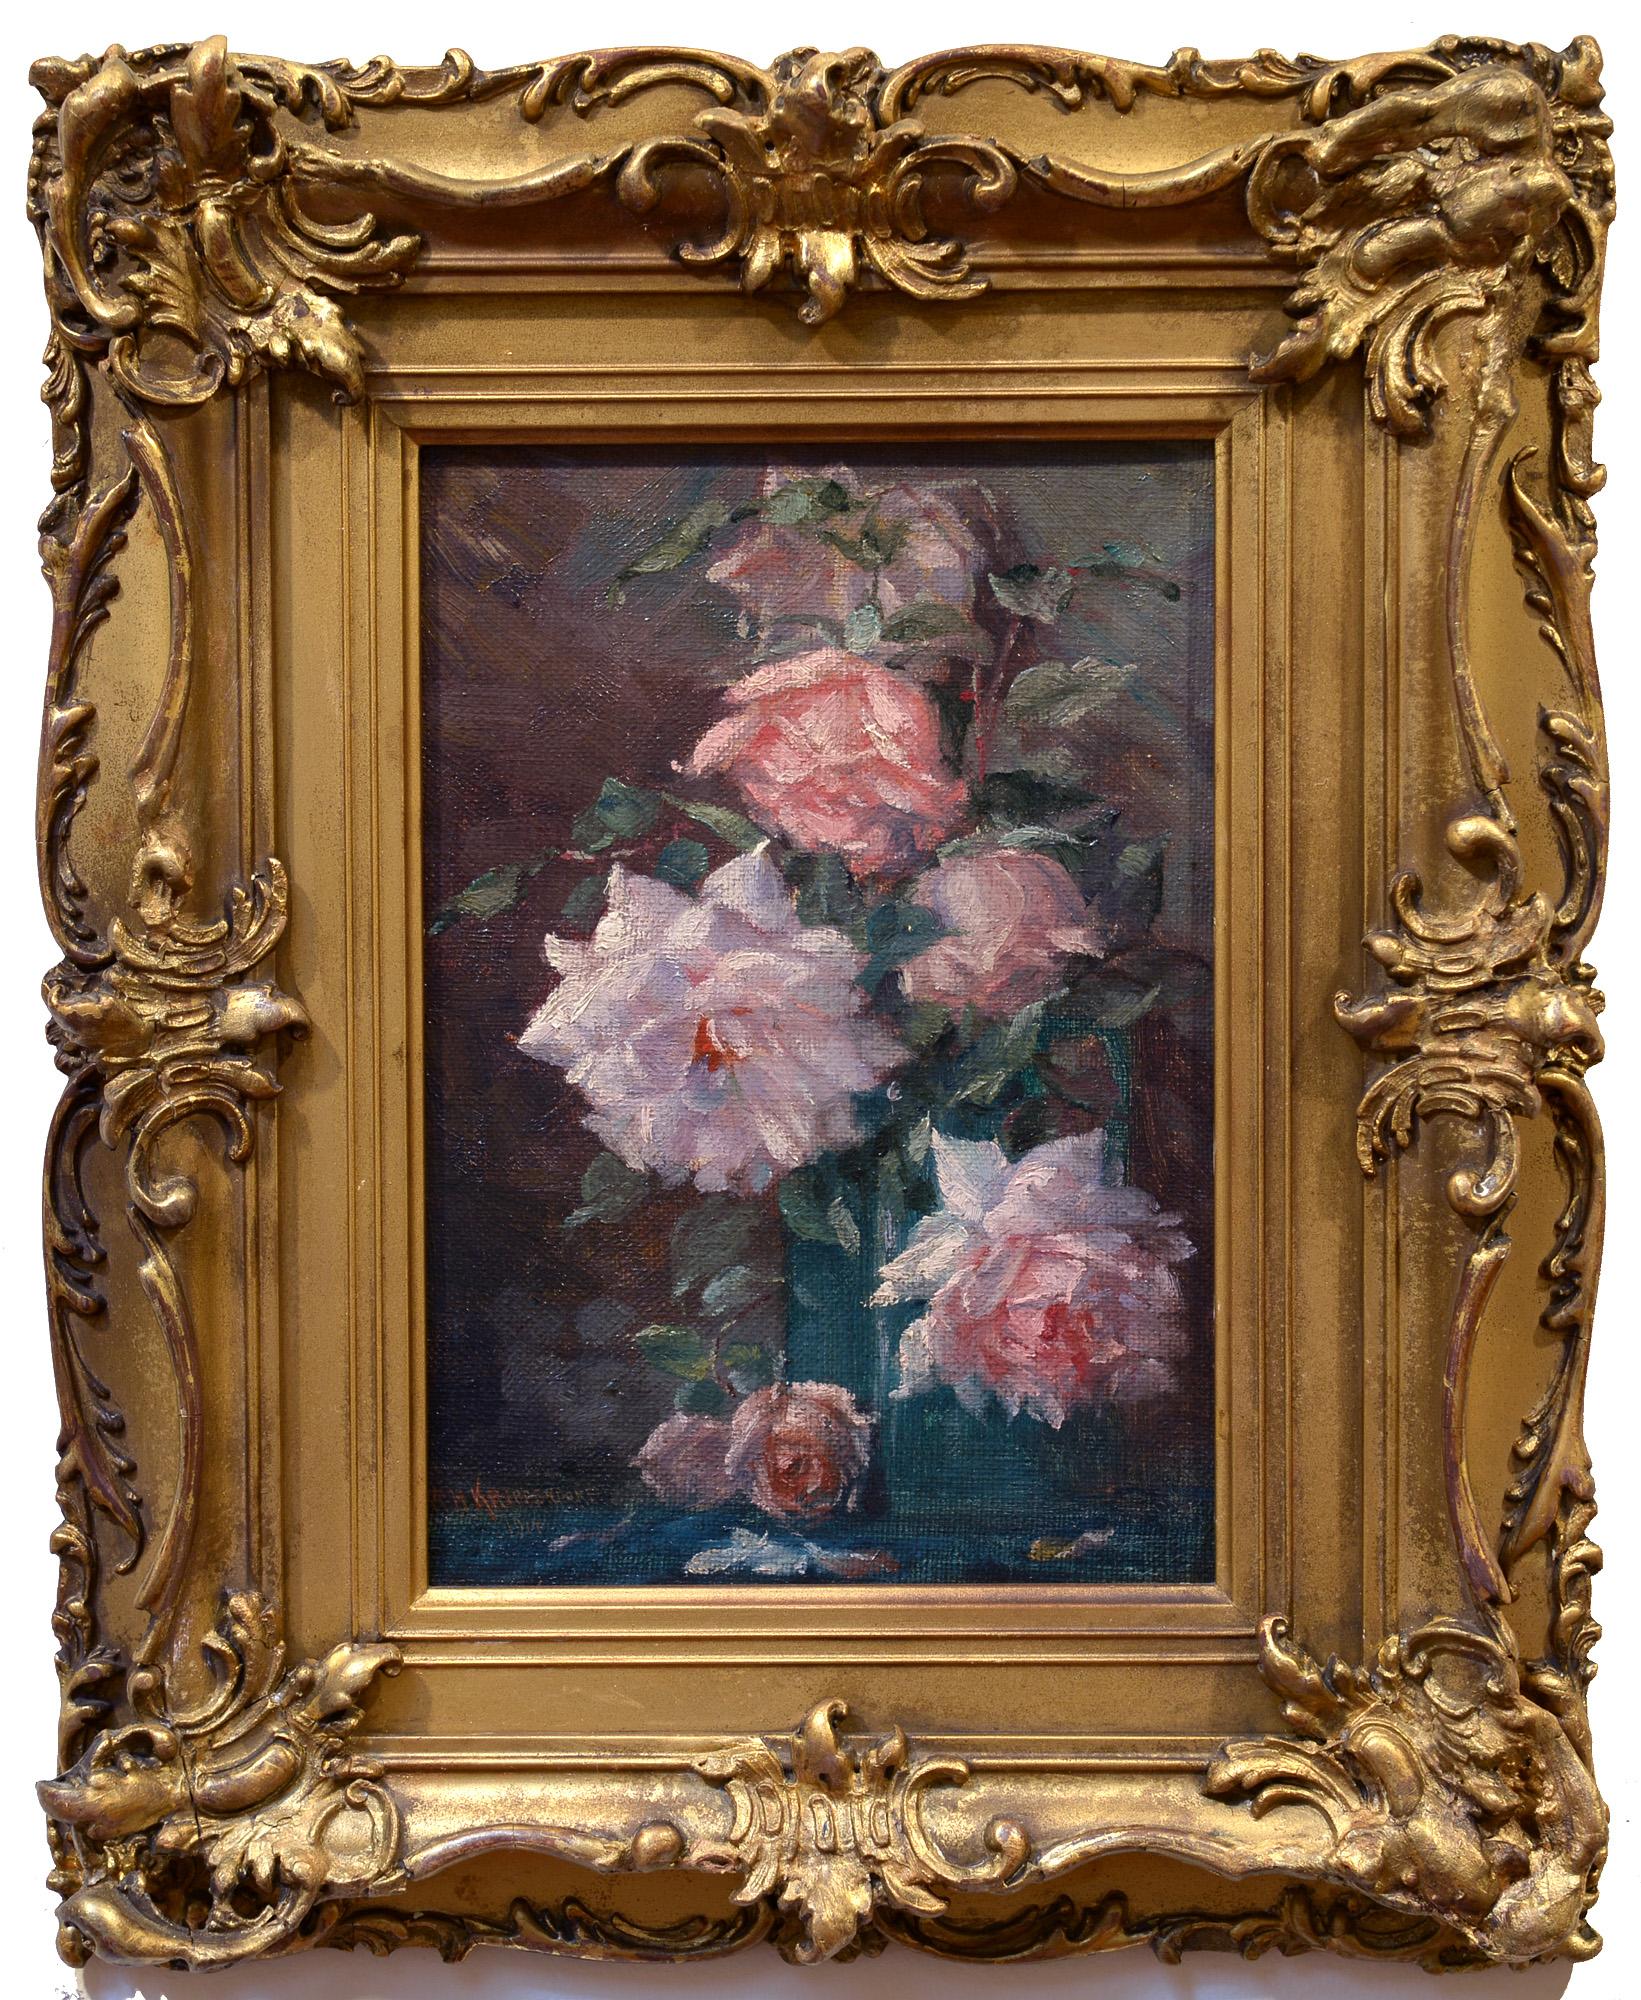 Still Life with Roses, Impressionist Oil of Flowers in a Blue Vase - Painting by William H. Krippendorf